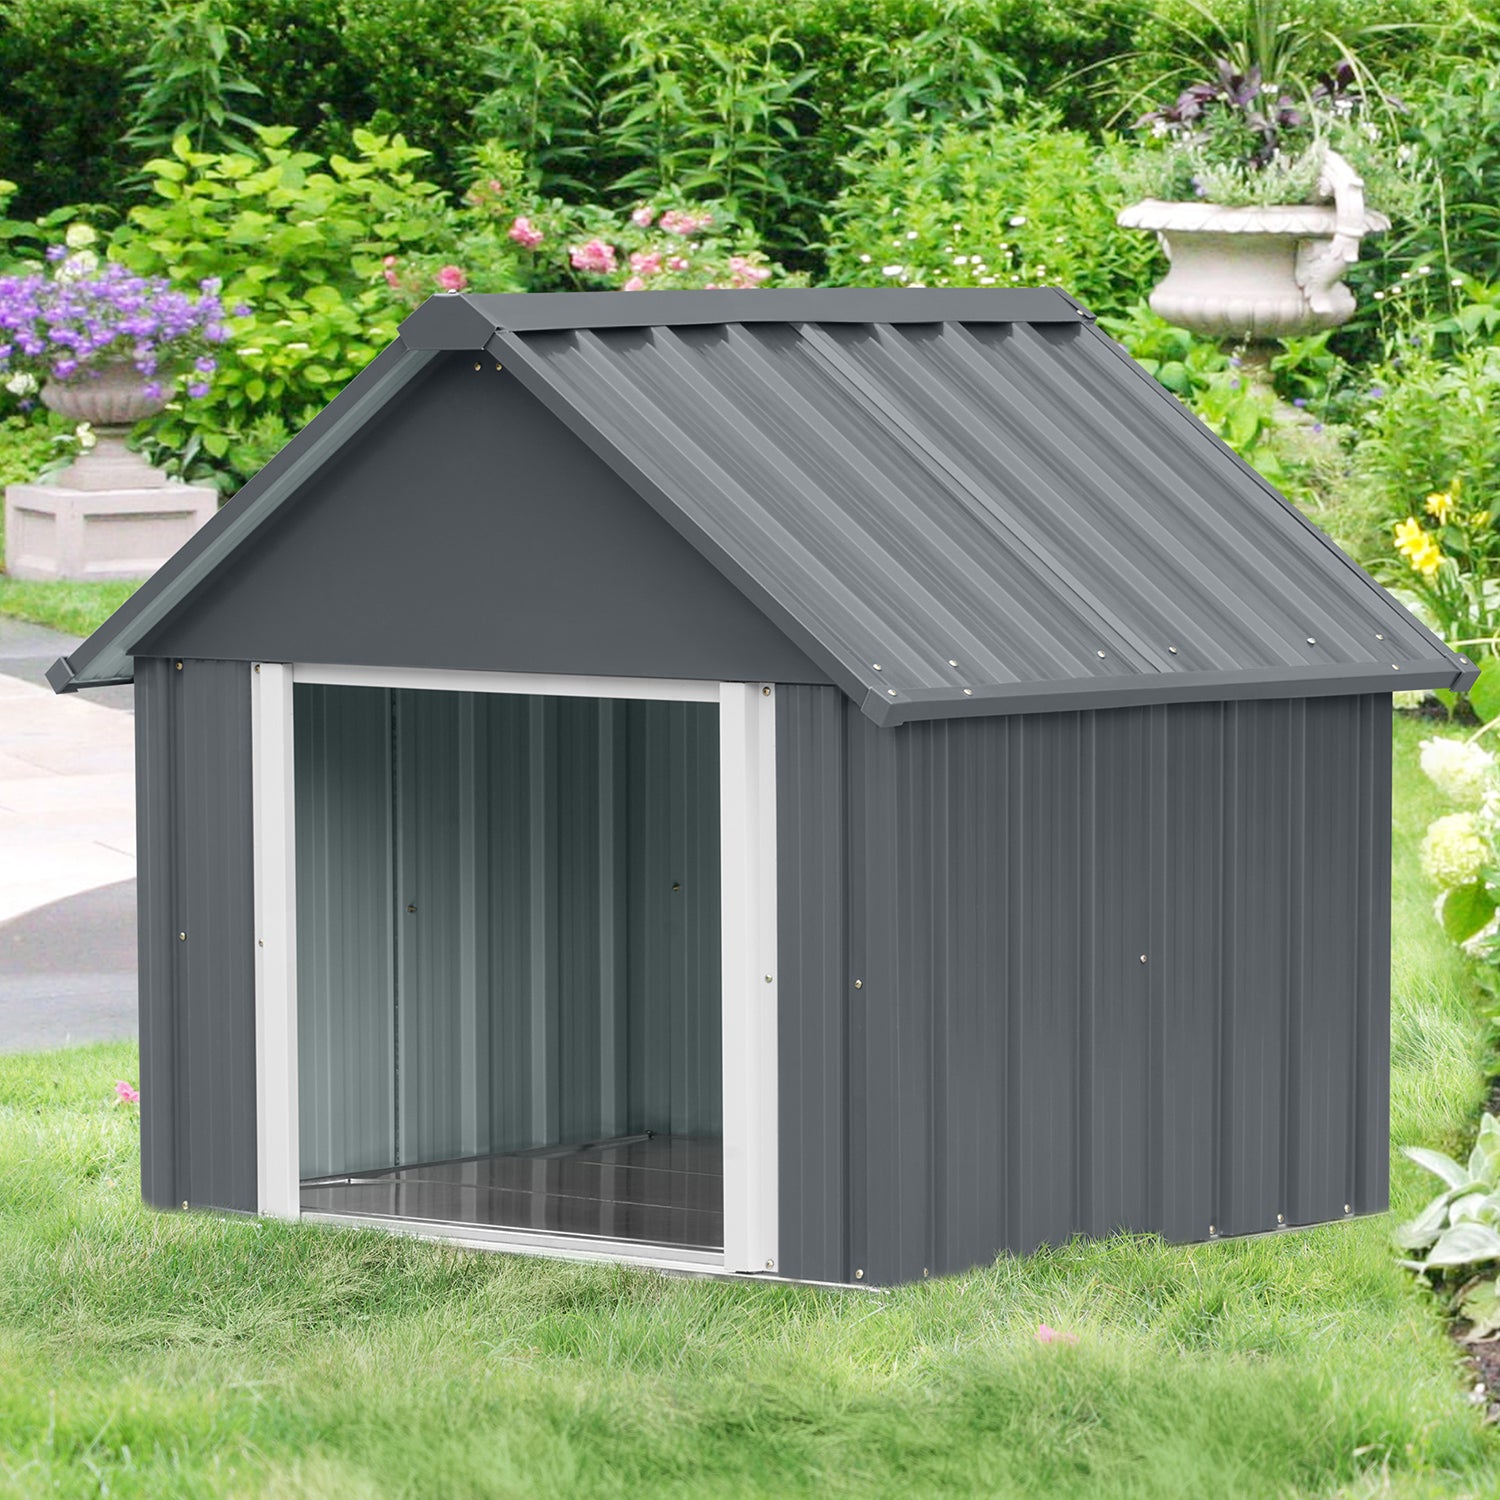 RYPetmia outdoor dog kennel